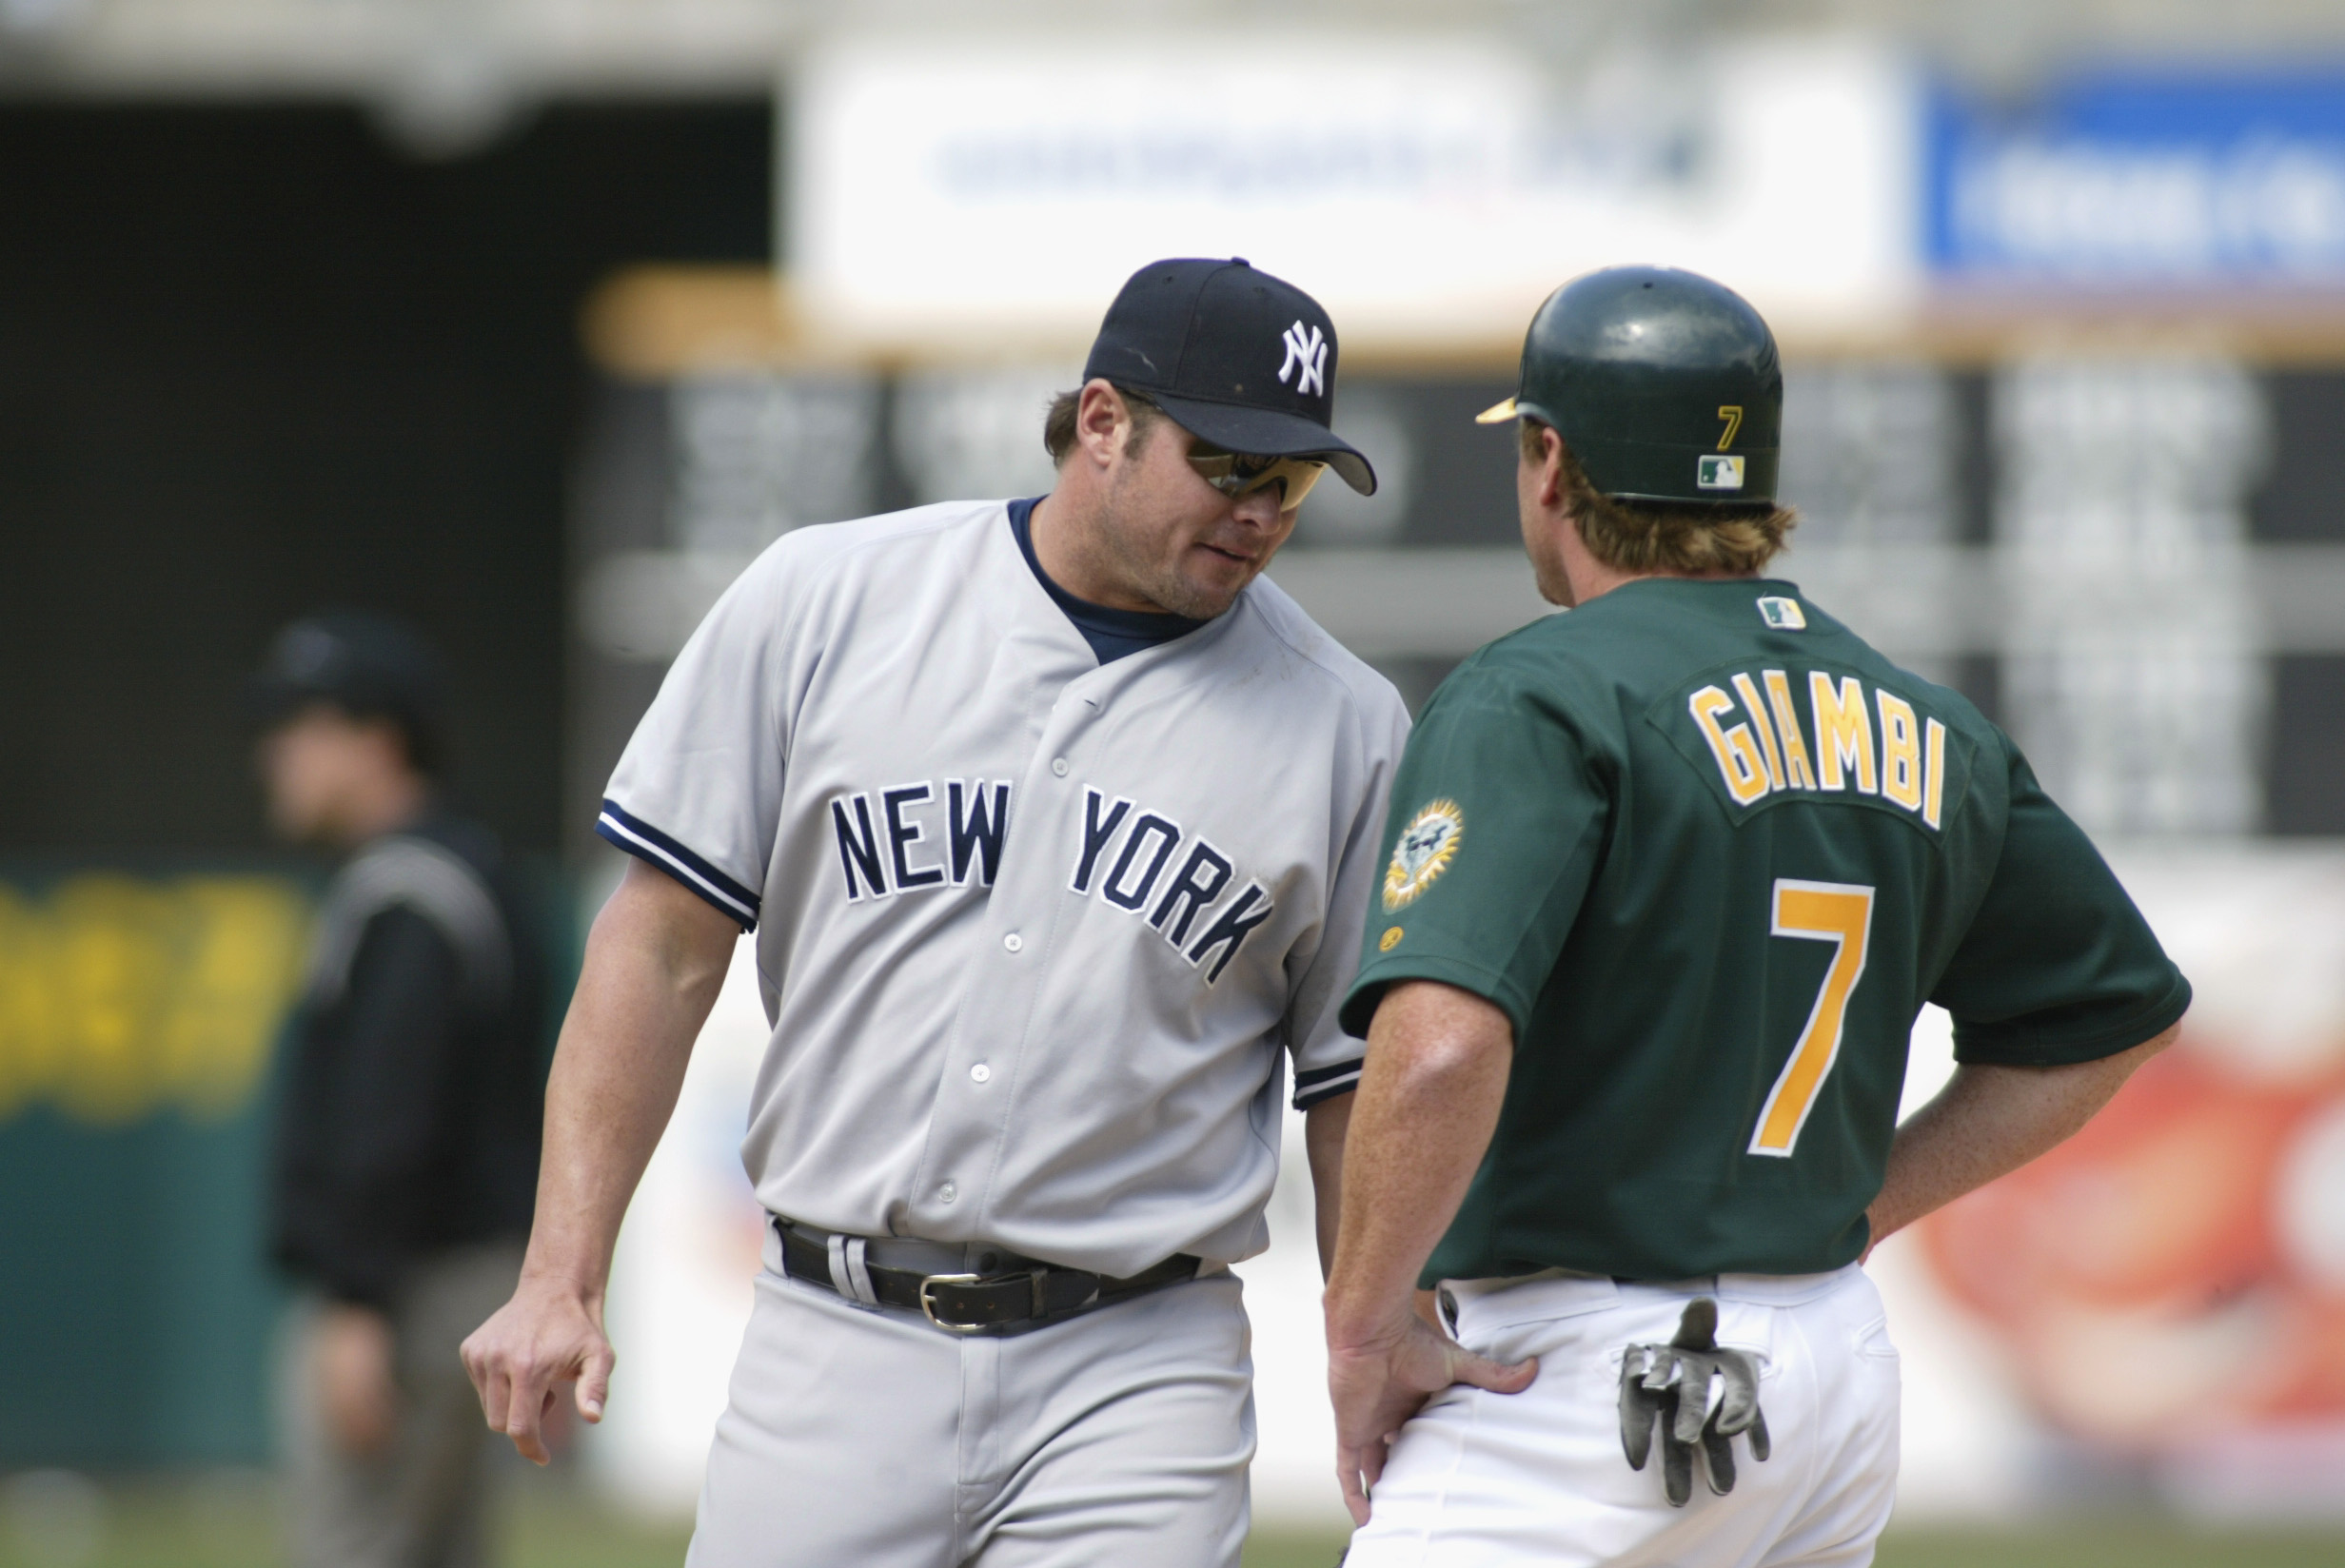 Ex-MLB player Jeremy Giambi 'seemed different' after baseball head